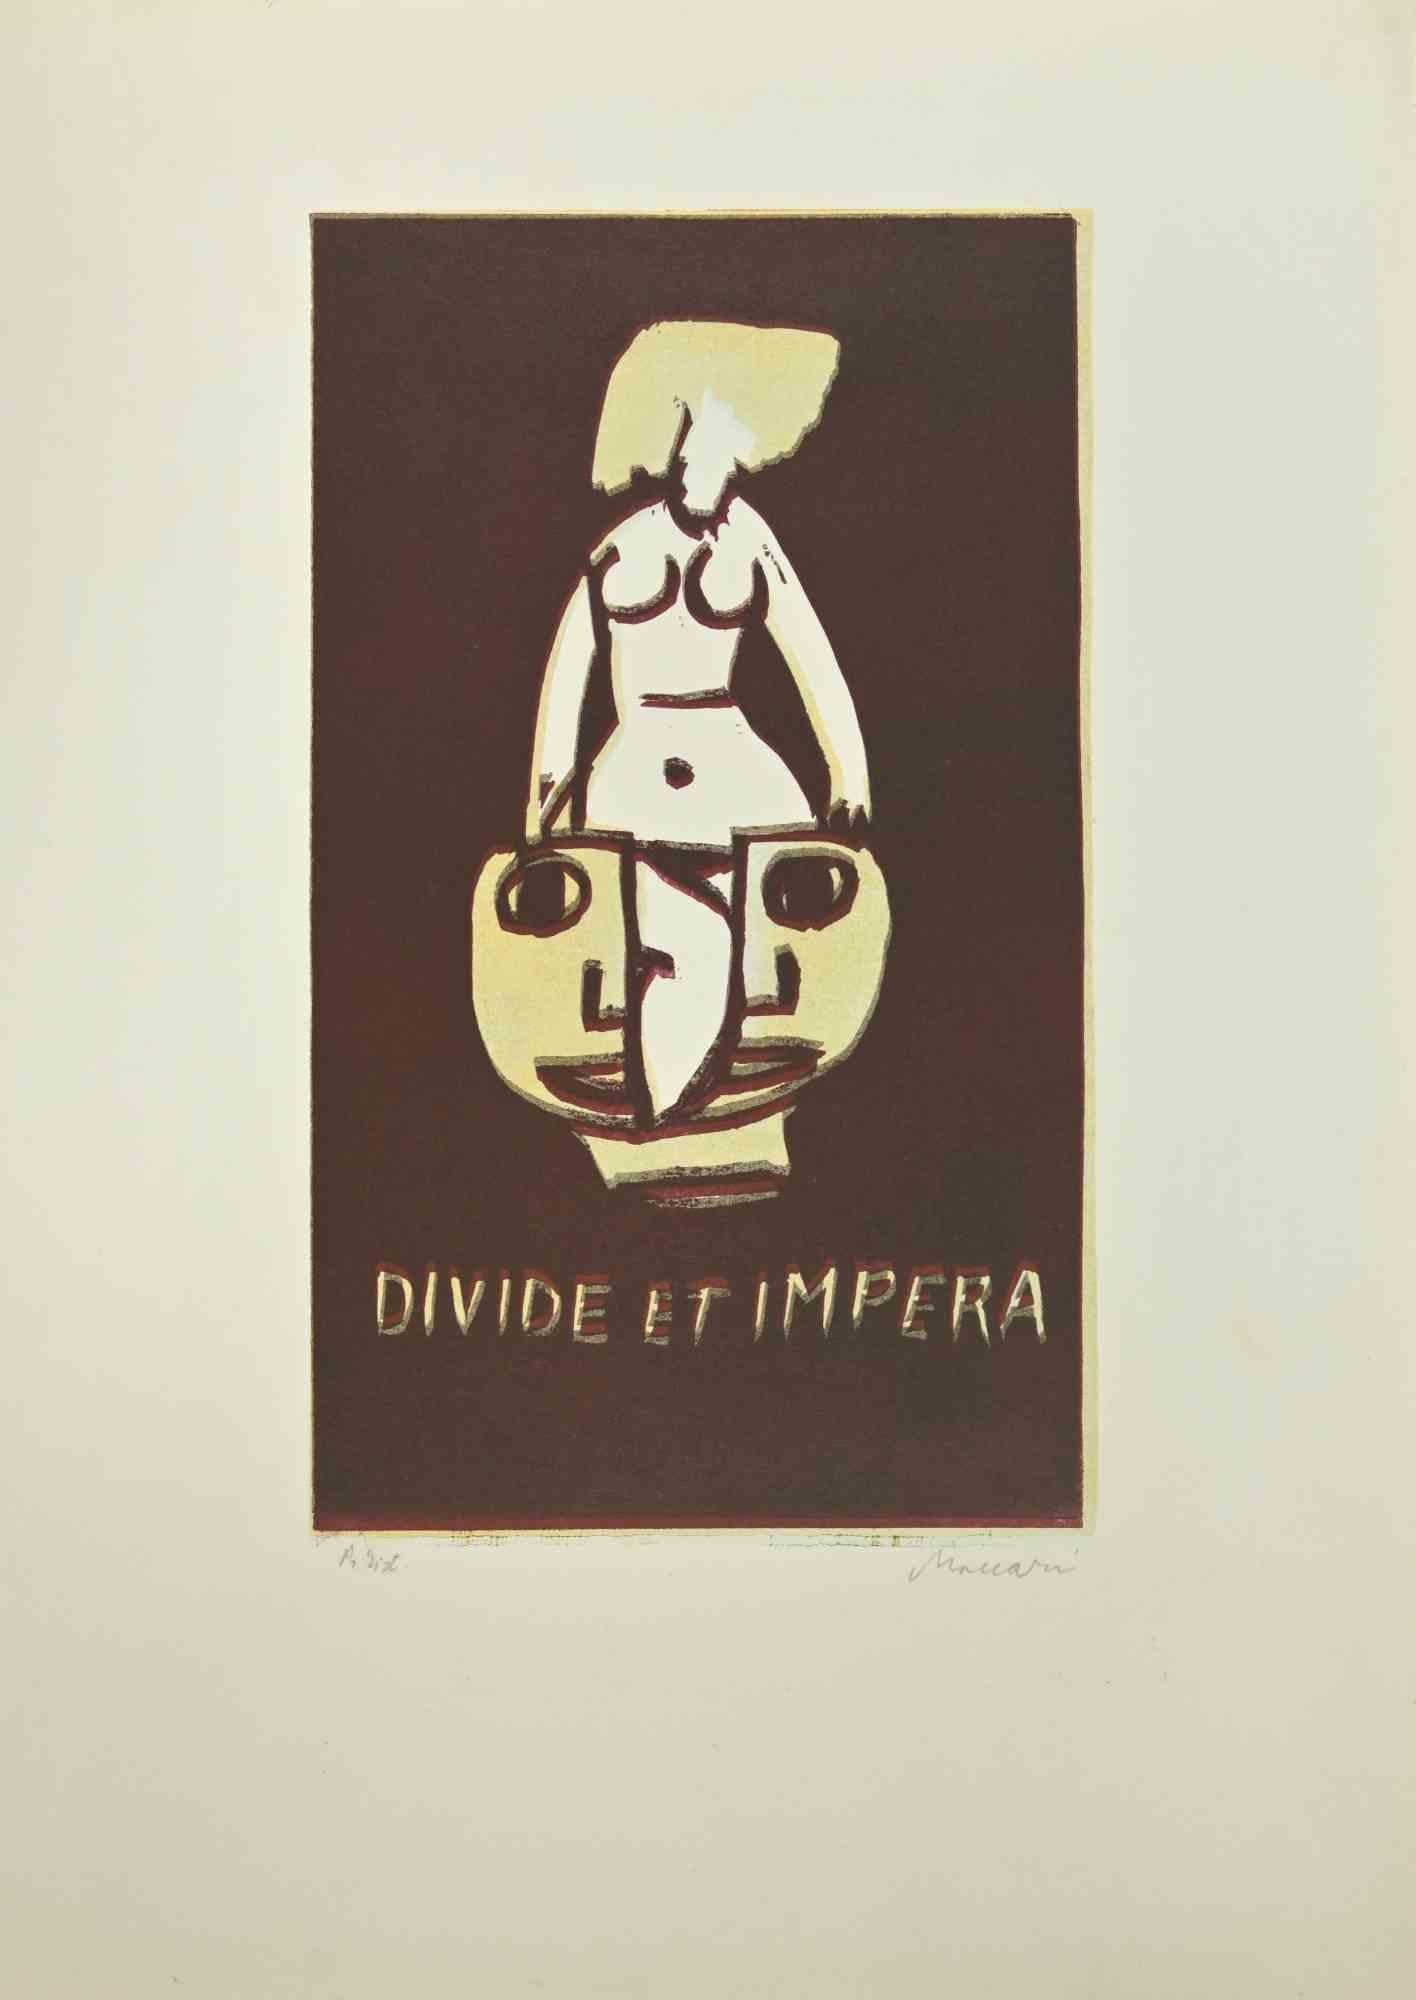 Divide et Impera is a Linocut realized by Mino Maccari in the 1960s.

Hand-signed in the lower right part.

Artist's Proof.

Good conditions.

Mino Maccari (Siena, 1924-Rome, June 16, 1989) was an Italian writer, painter, engraver and journalist,